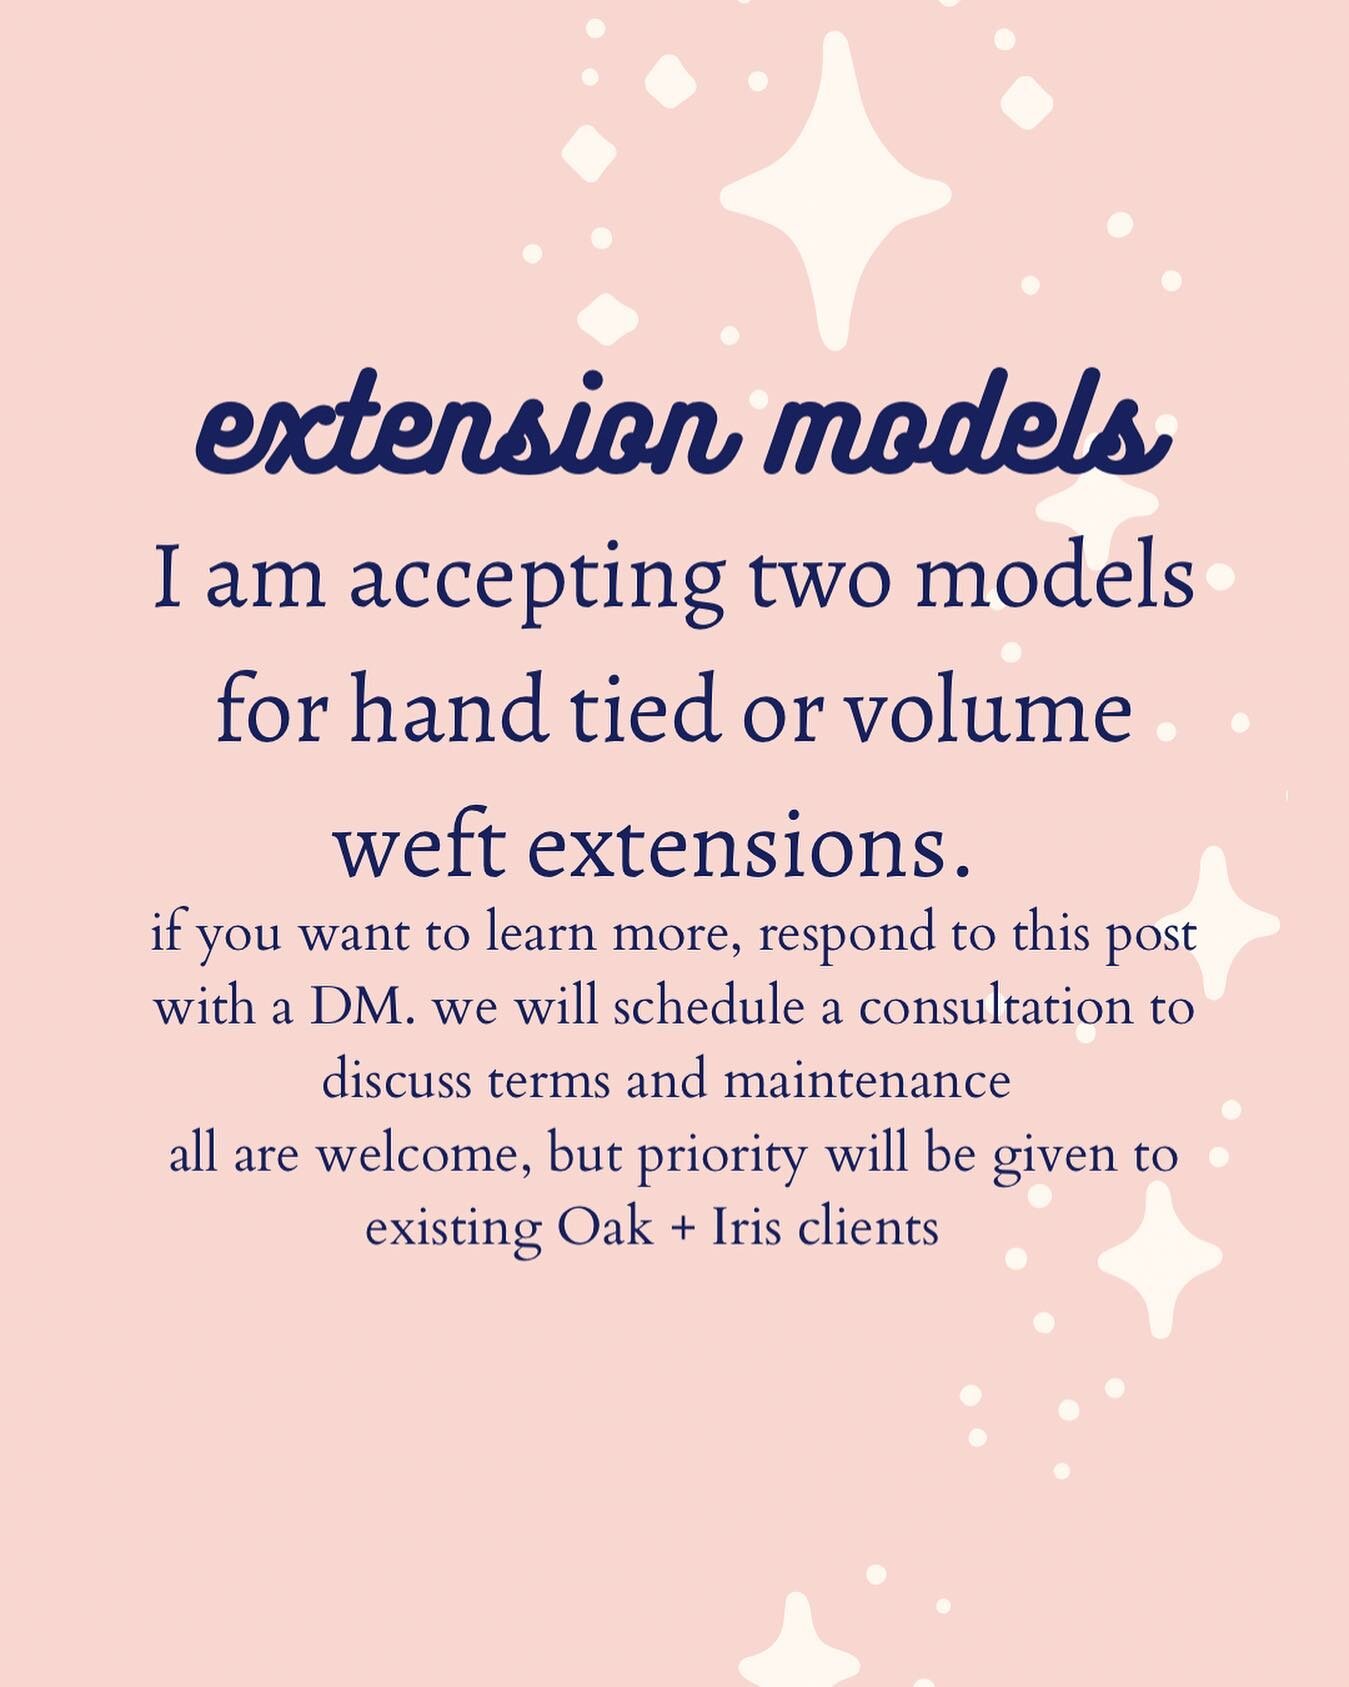 Have you been thinking about hair extensions, but not sure if you&rsquo;re ready for the full investment or maintenance schedule? This is for you! Accepting two models for hand tied or volume weft hair extensions. DM to to schedule a consultation!